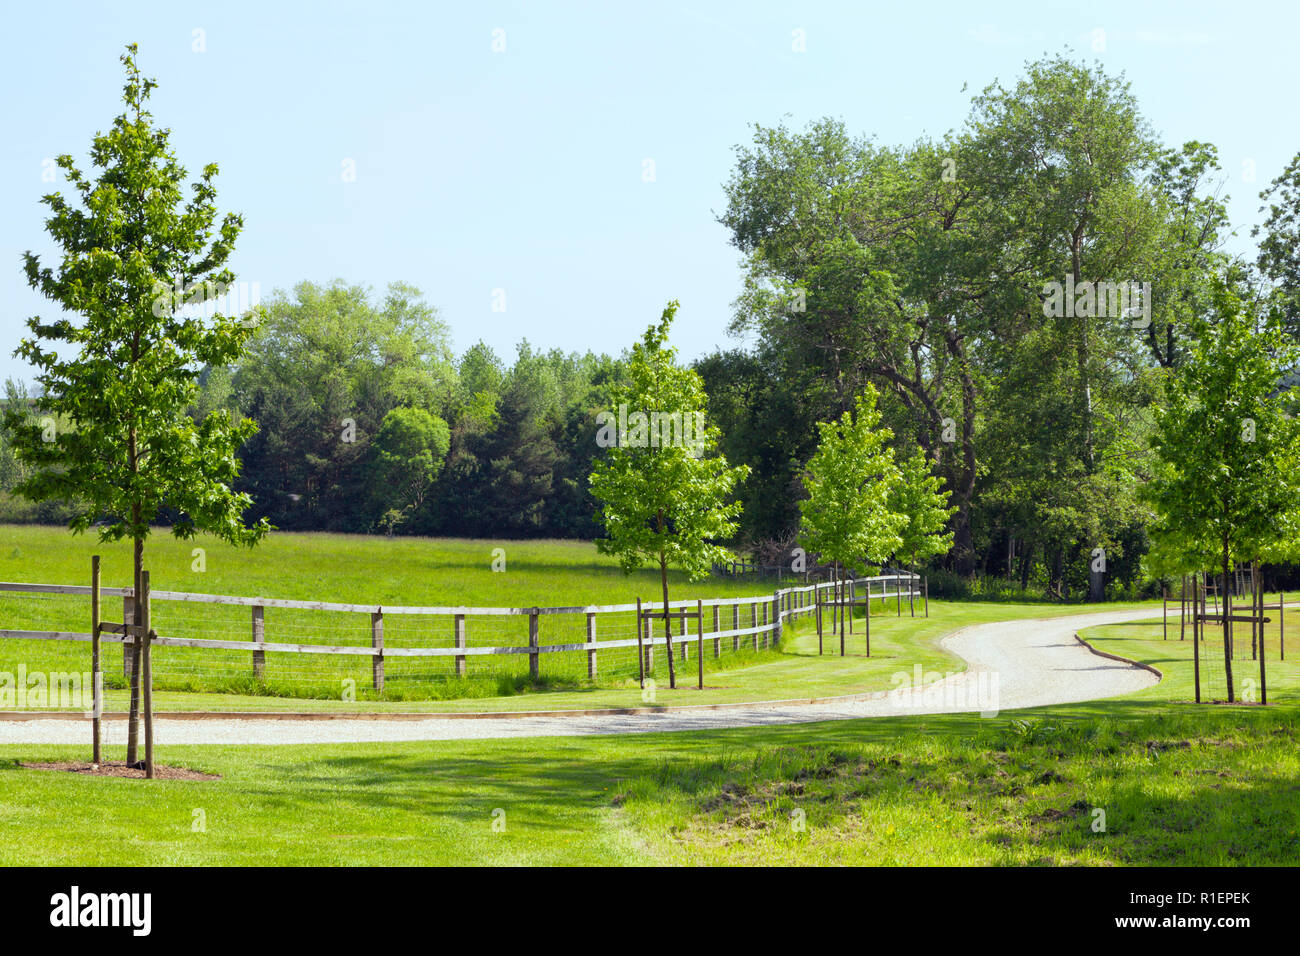 Curvy stone path in an English rural countryside on a sunny summer day. Stock Photo